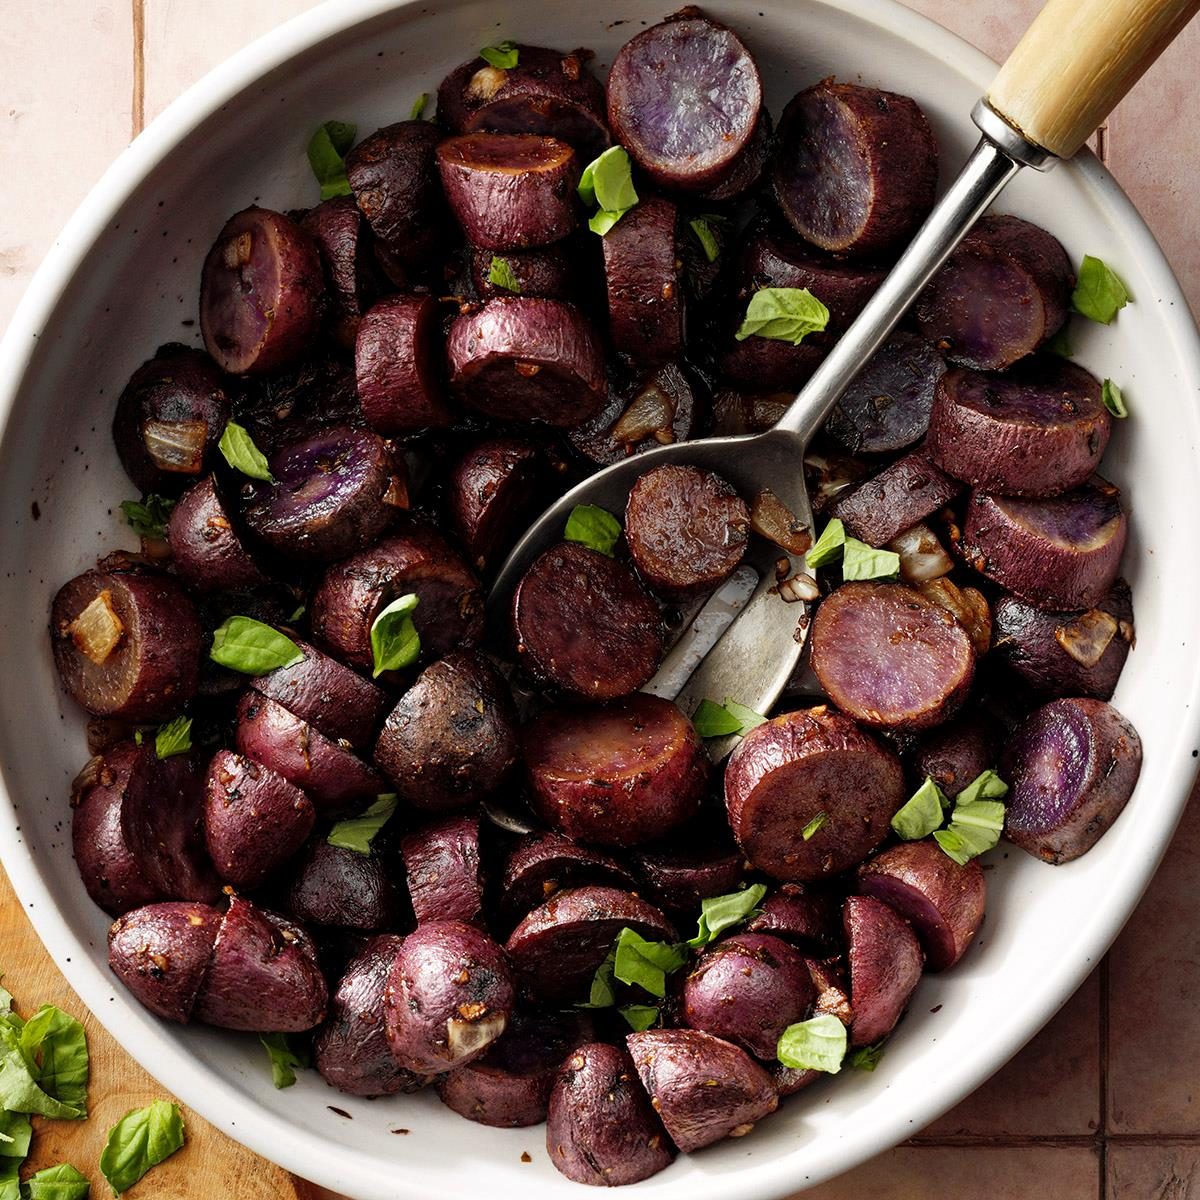 All Things Purple Potatoes - Waves in the Kitchen